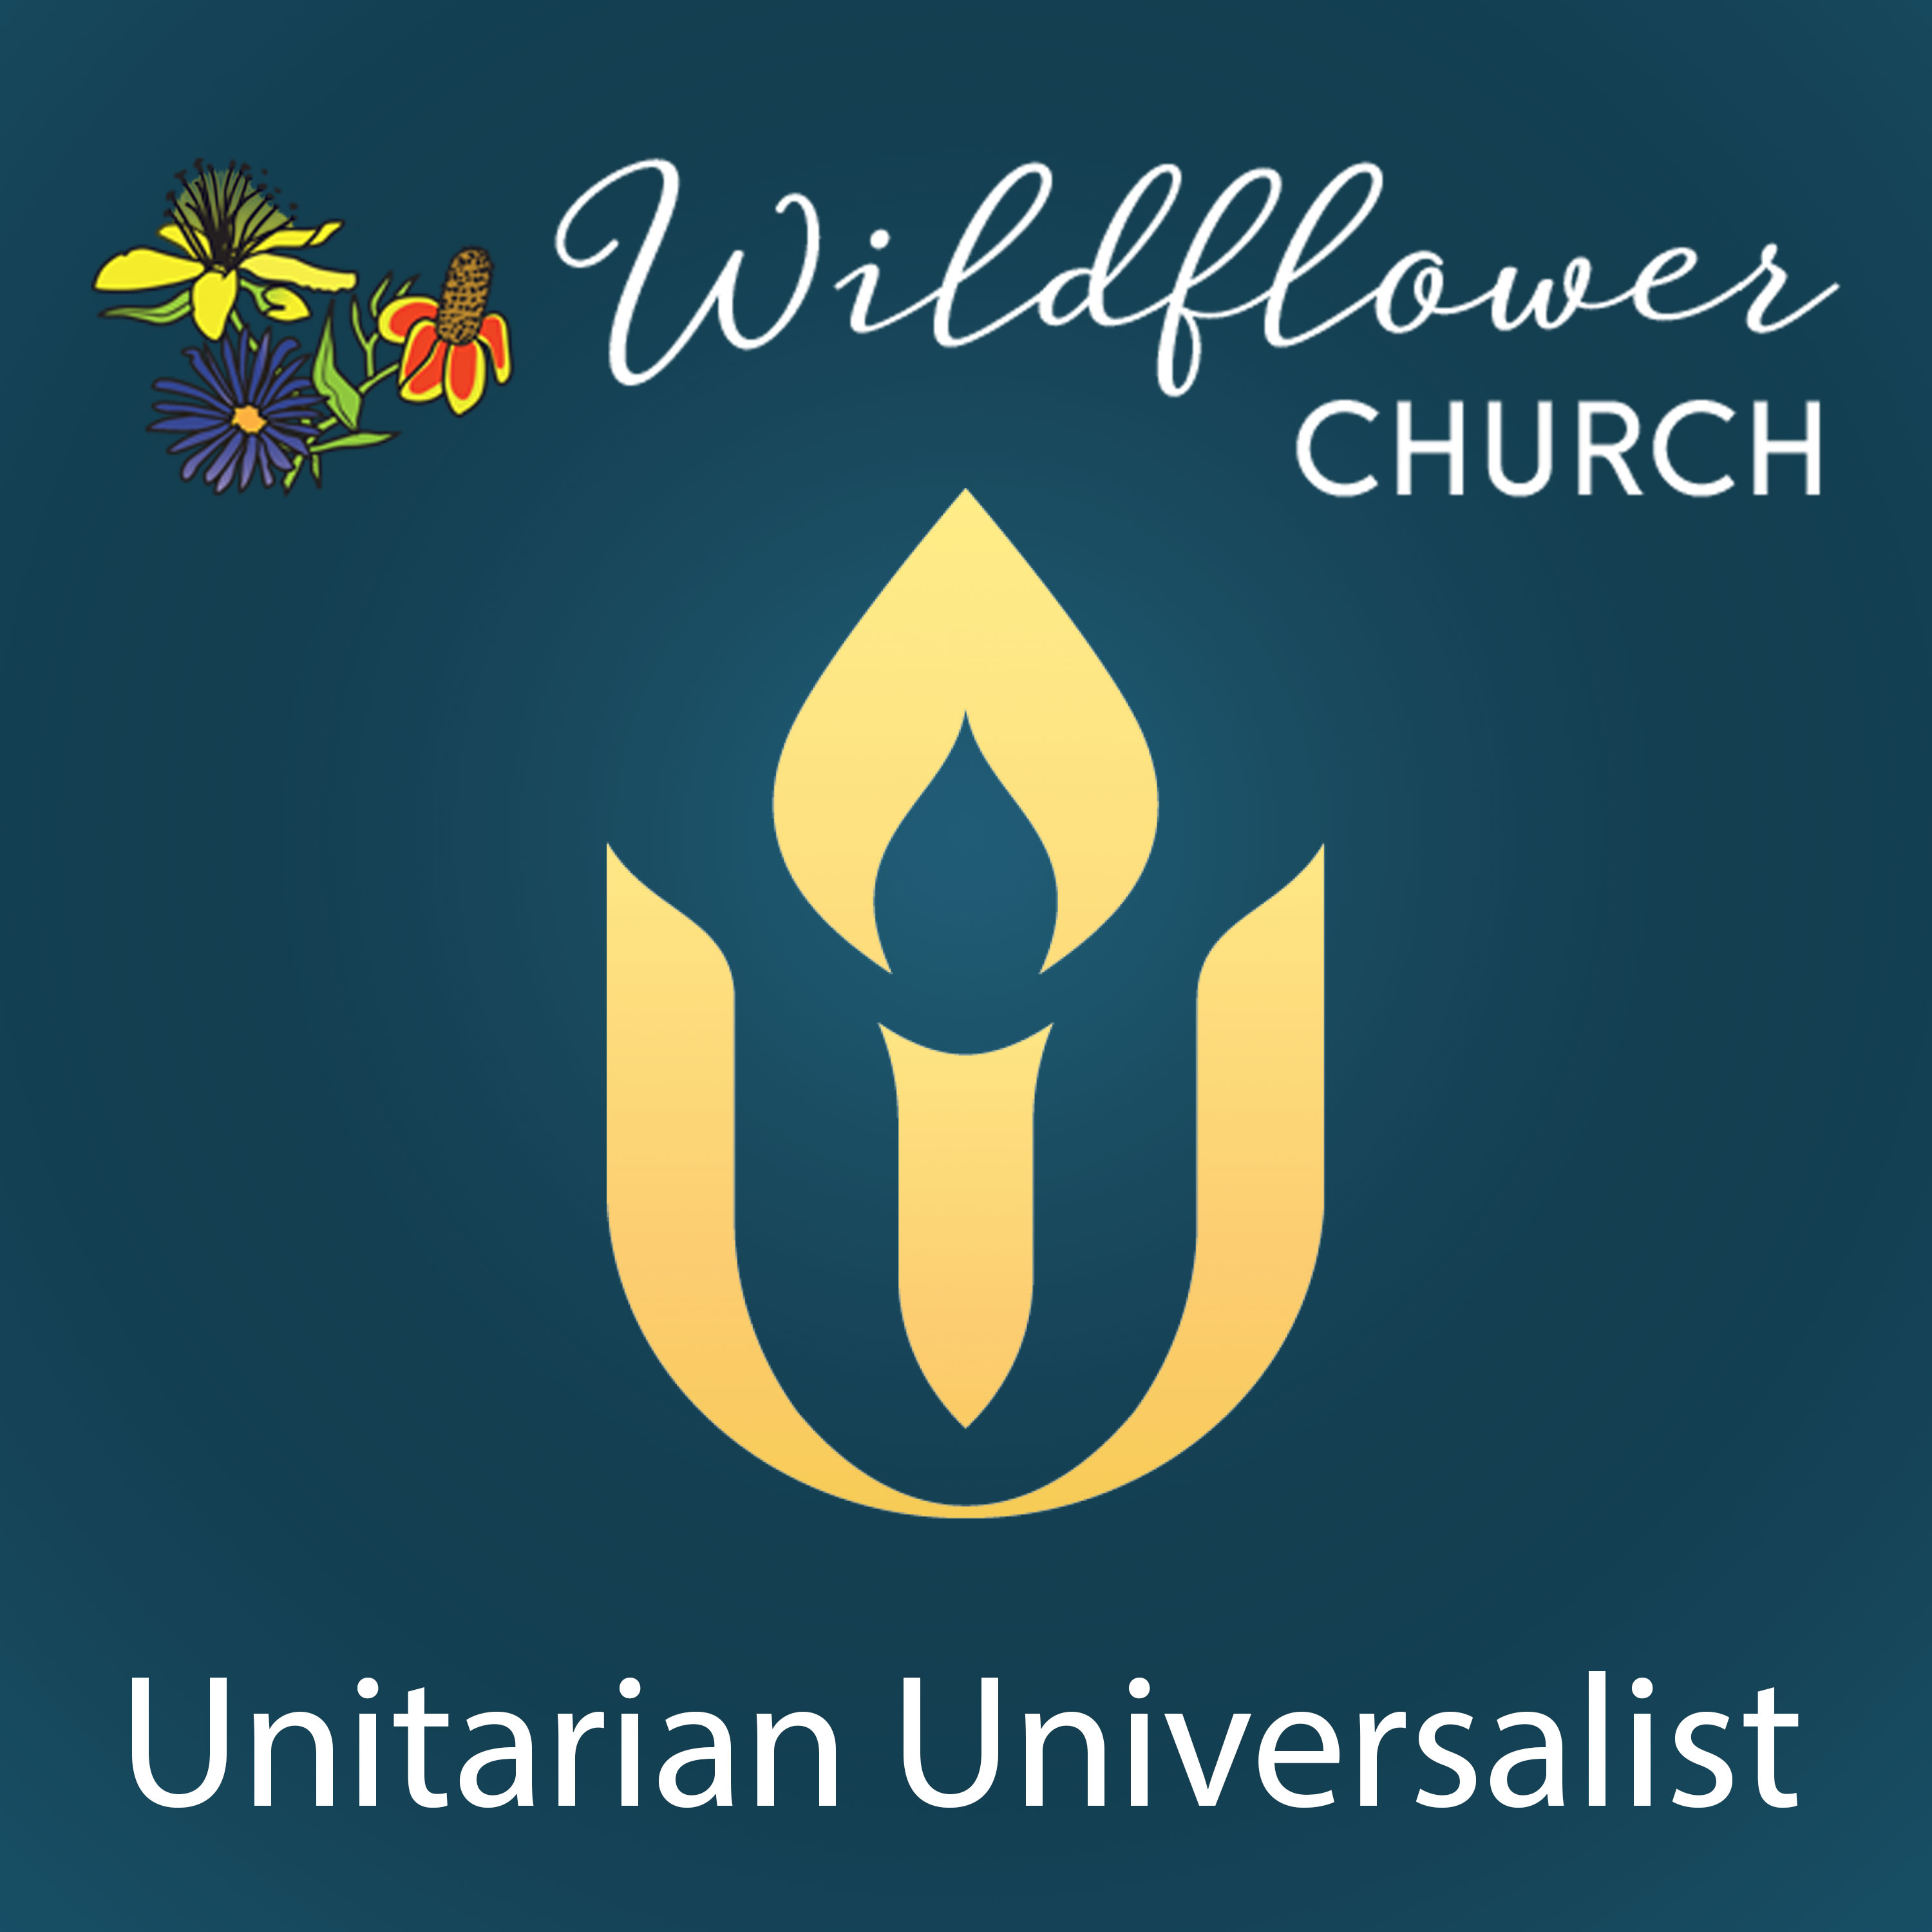 Wildflower Church:  Growing Spiritually Together Creating Beloved Community:  Past, Present, Future